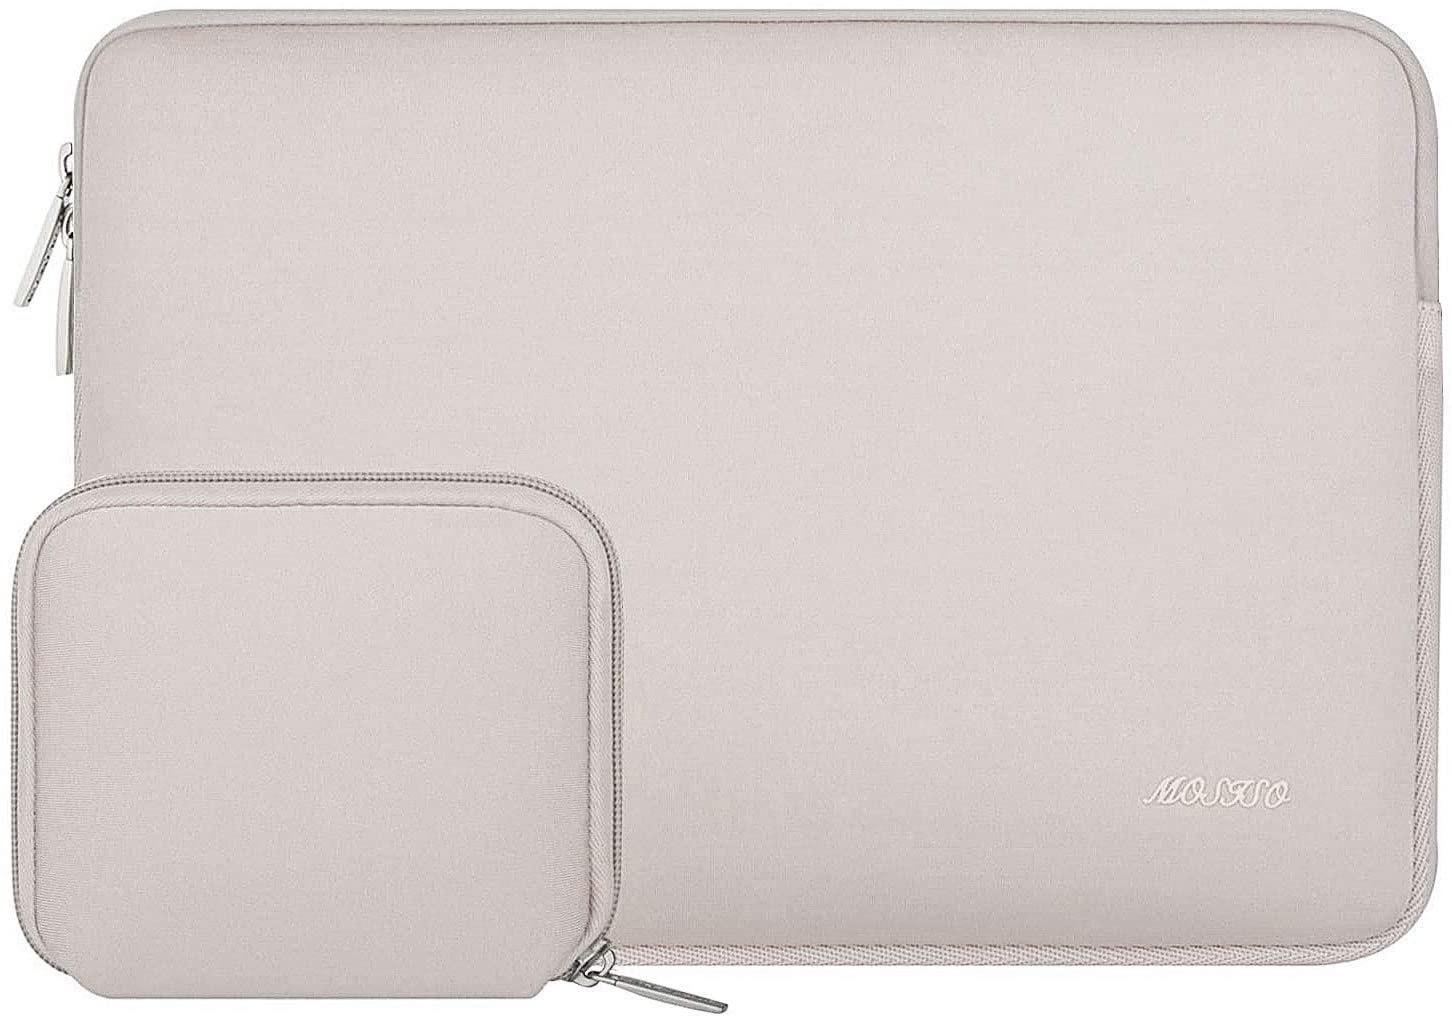 MOSISO Quatrefoil Style Canvas Fabric Laptop Sleeve Case Cover Bag with Shoulder Strap for 13-13.3 inch MacBook Pro, MacBook Air, Notebook Computer